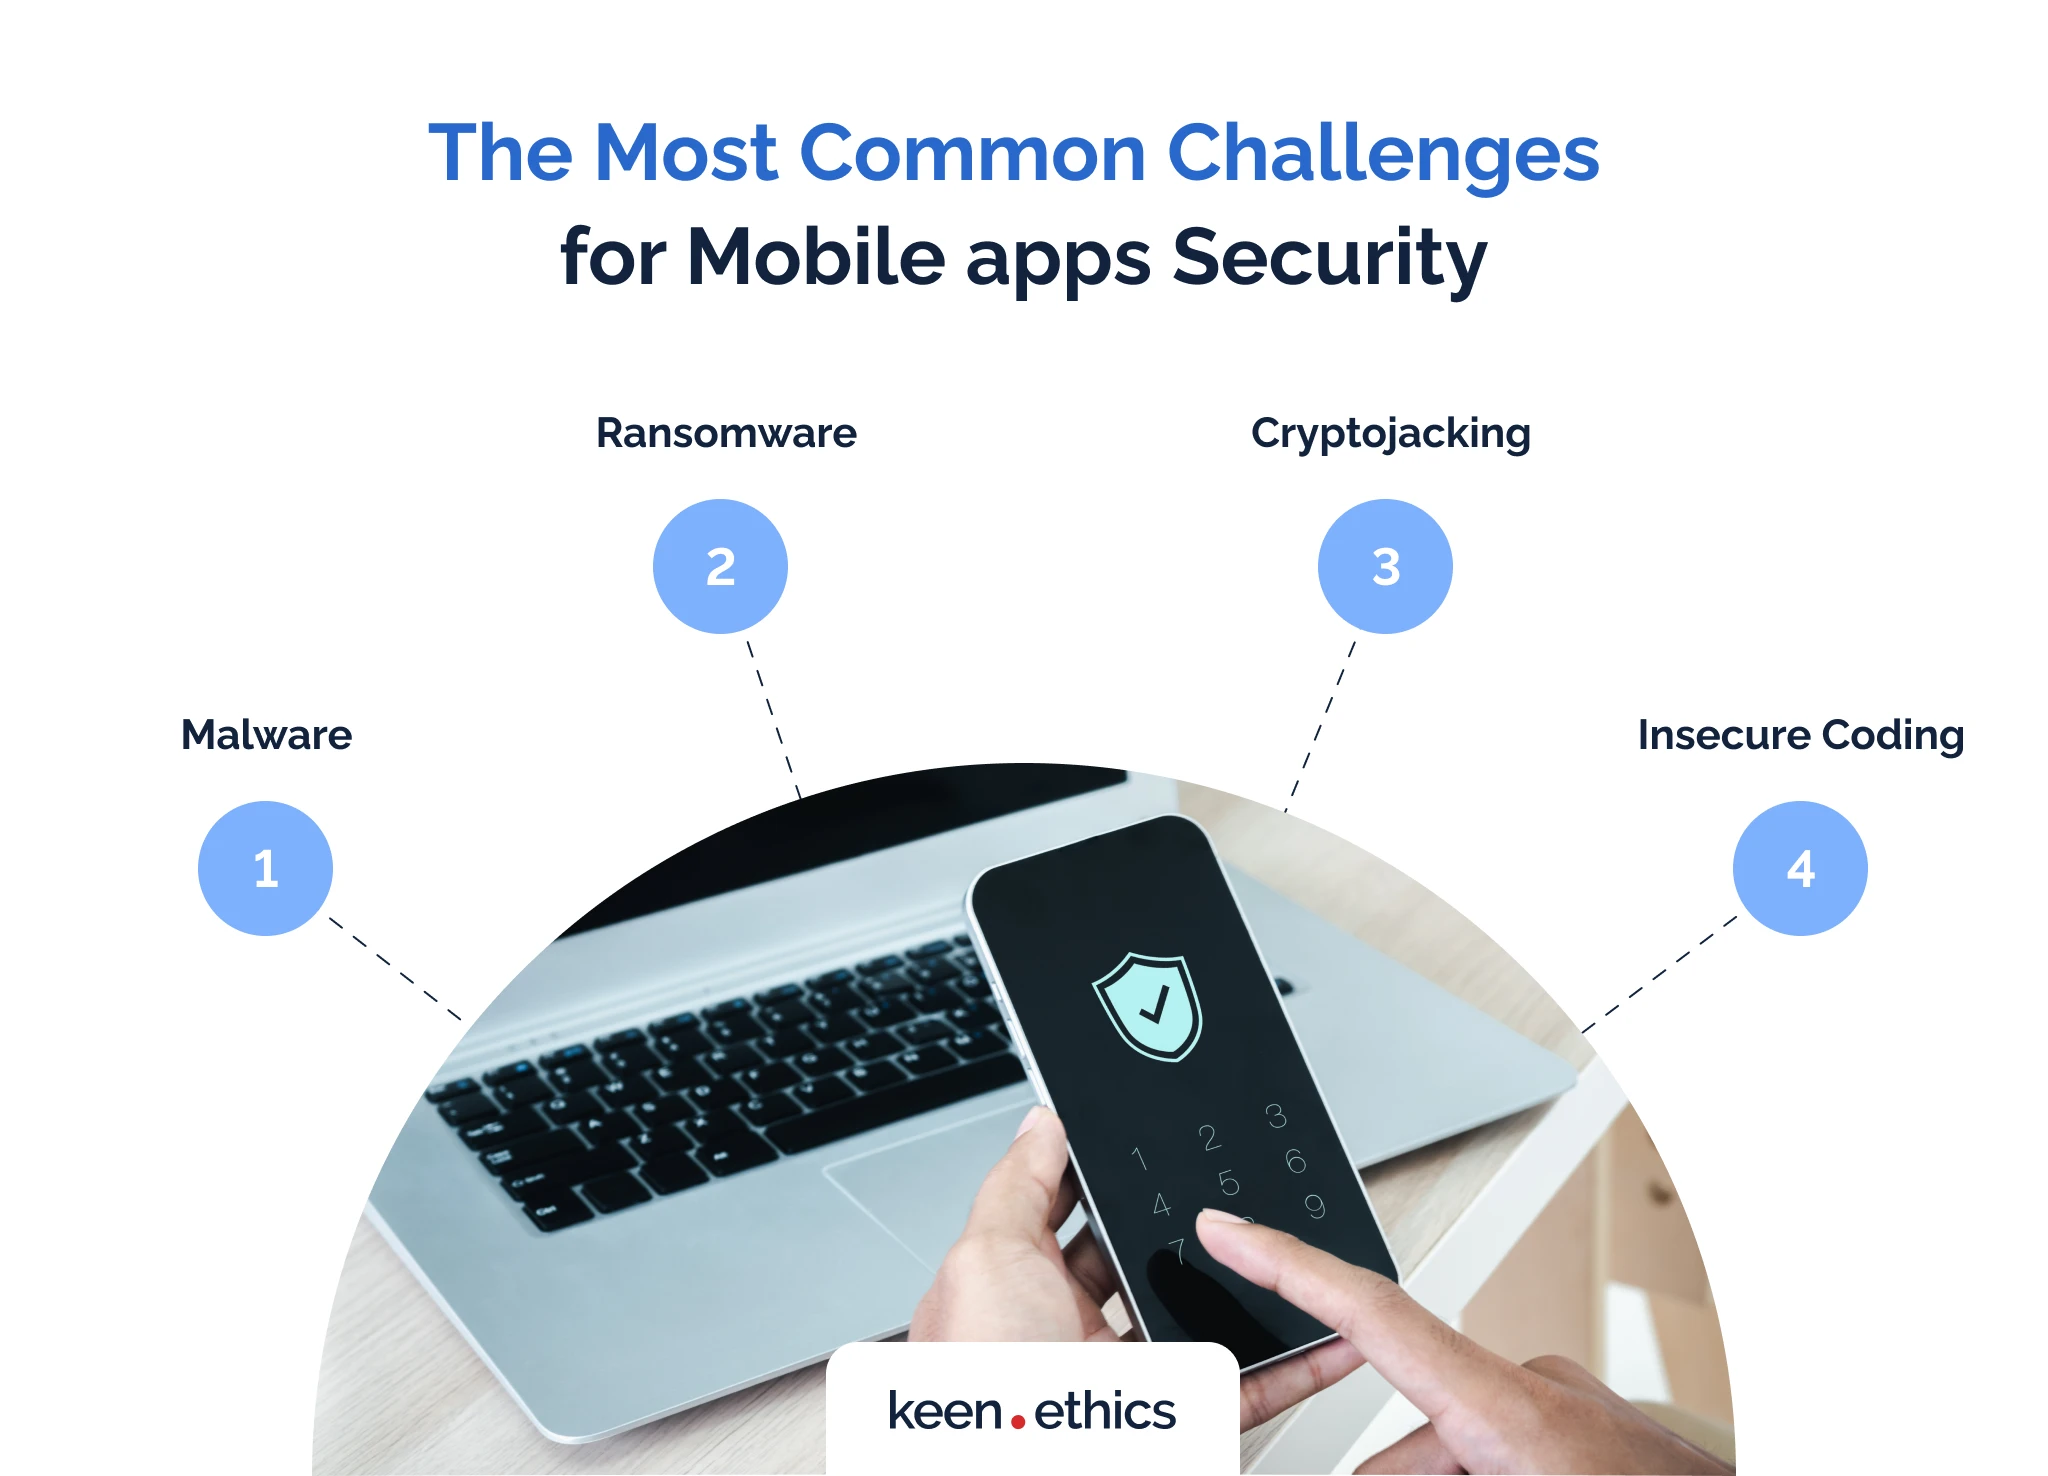 The most common challenges for mobile apps security